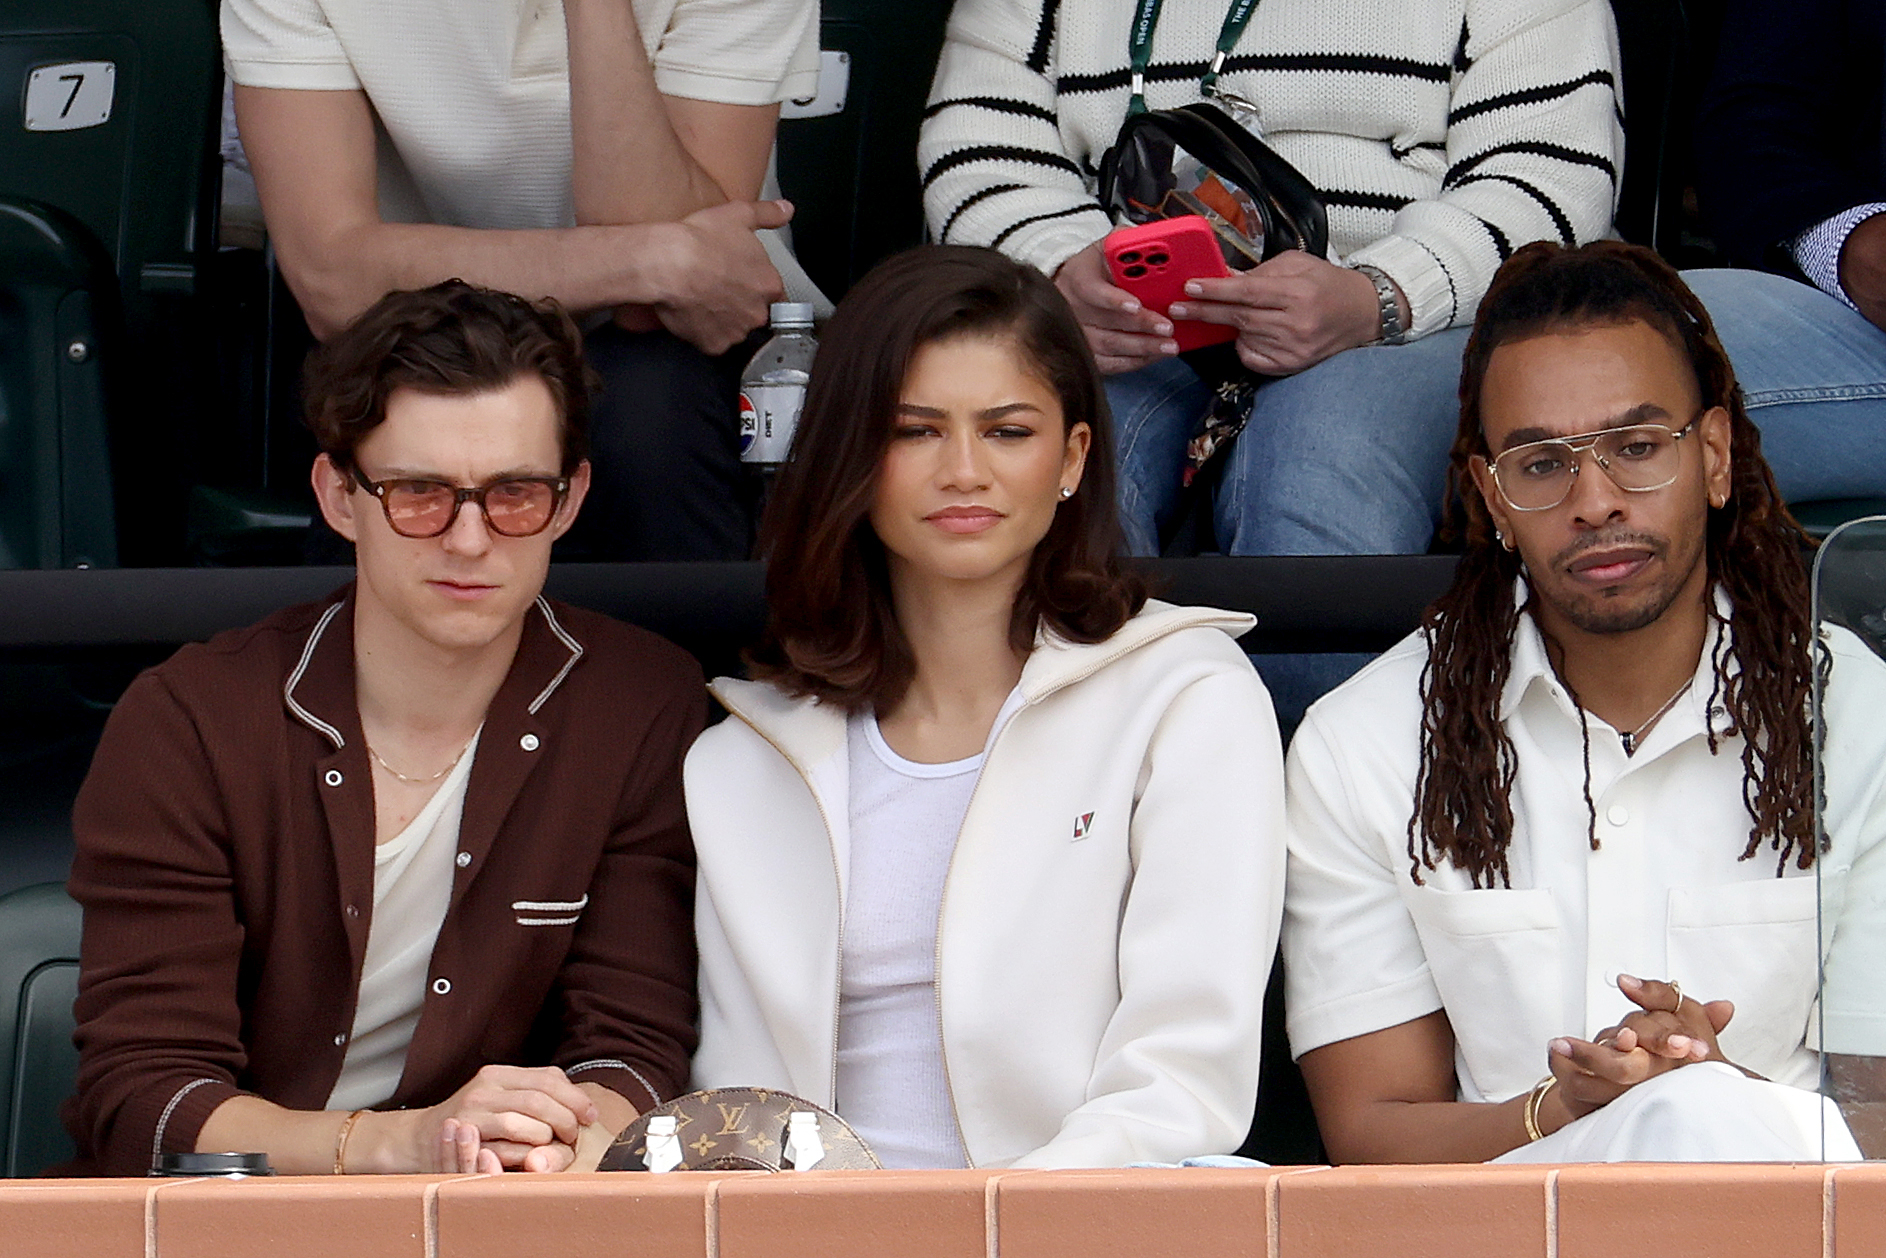 Tom Holland, Zendaya, and another man seated together at an event, dressed in casual attire